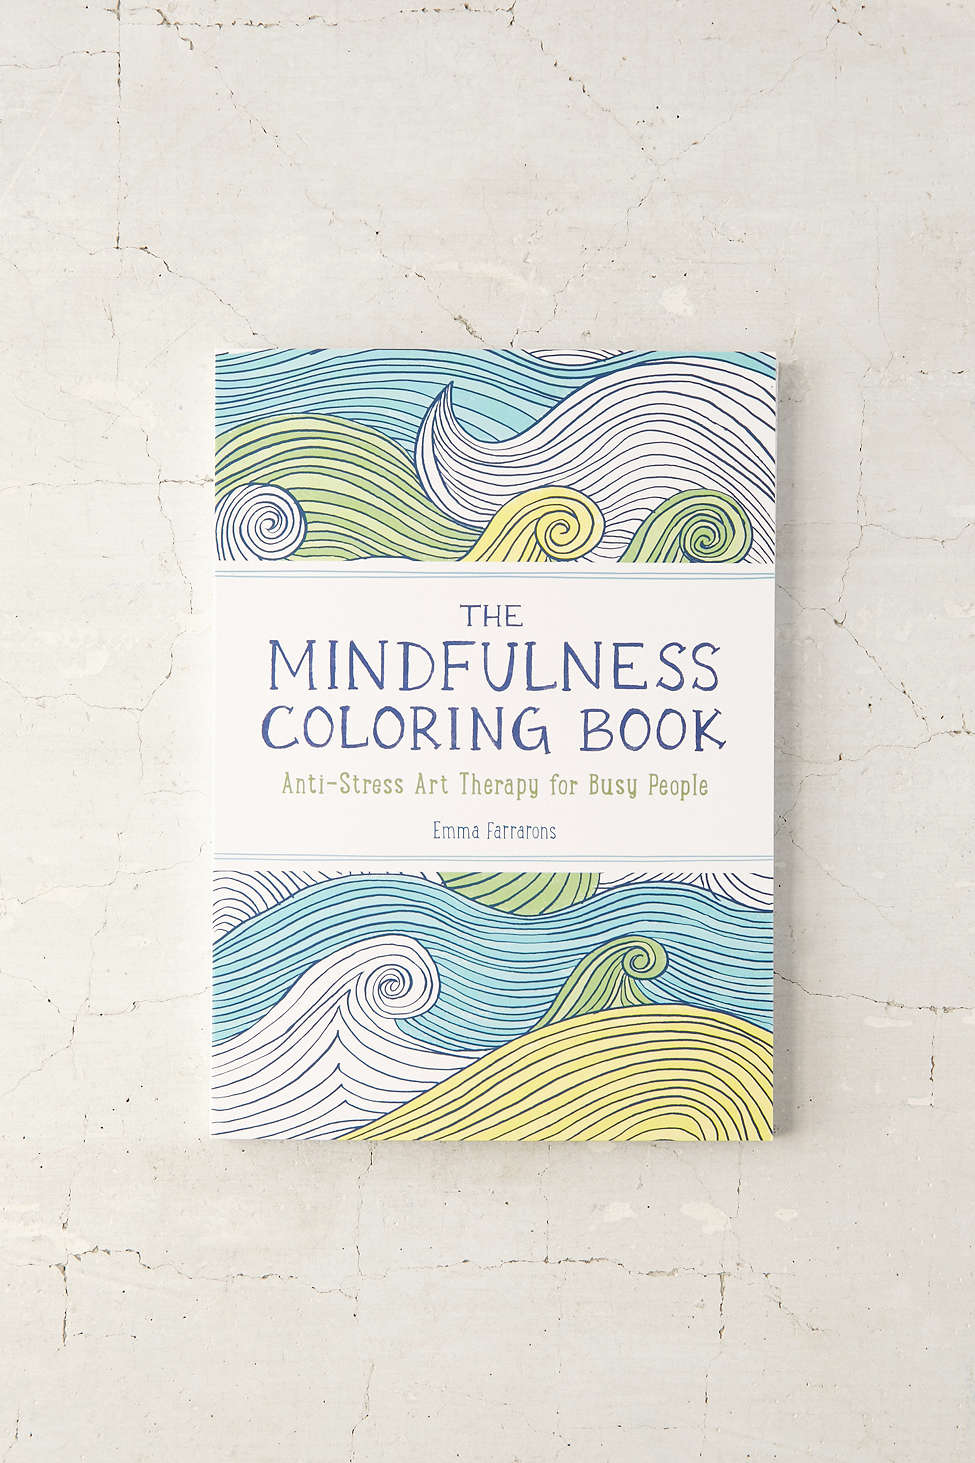 15 Little Things Every Person With Anxiety Needs - Coloring Book from Urban Outfitters